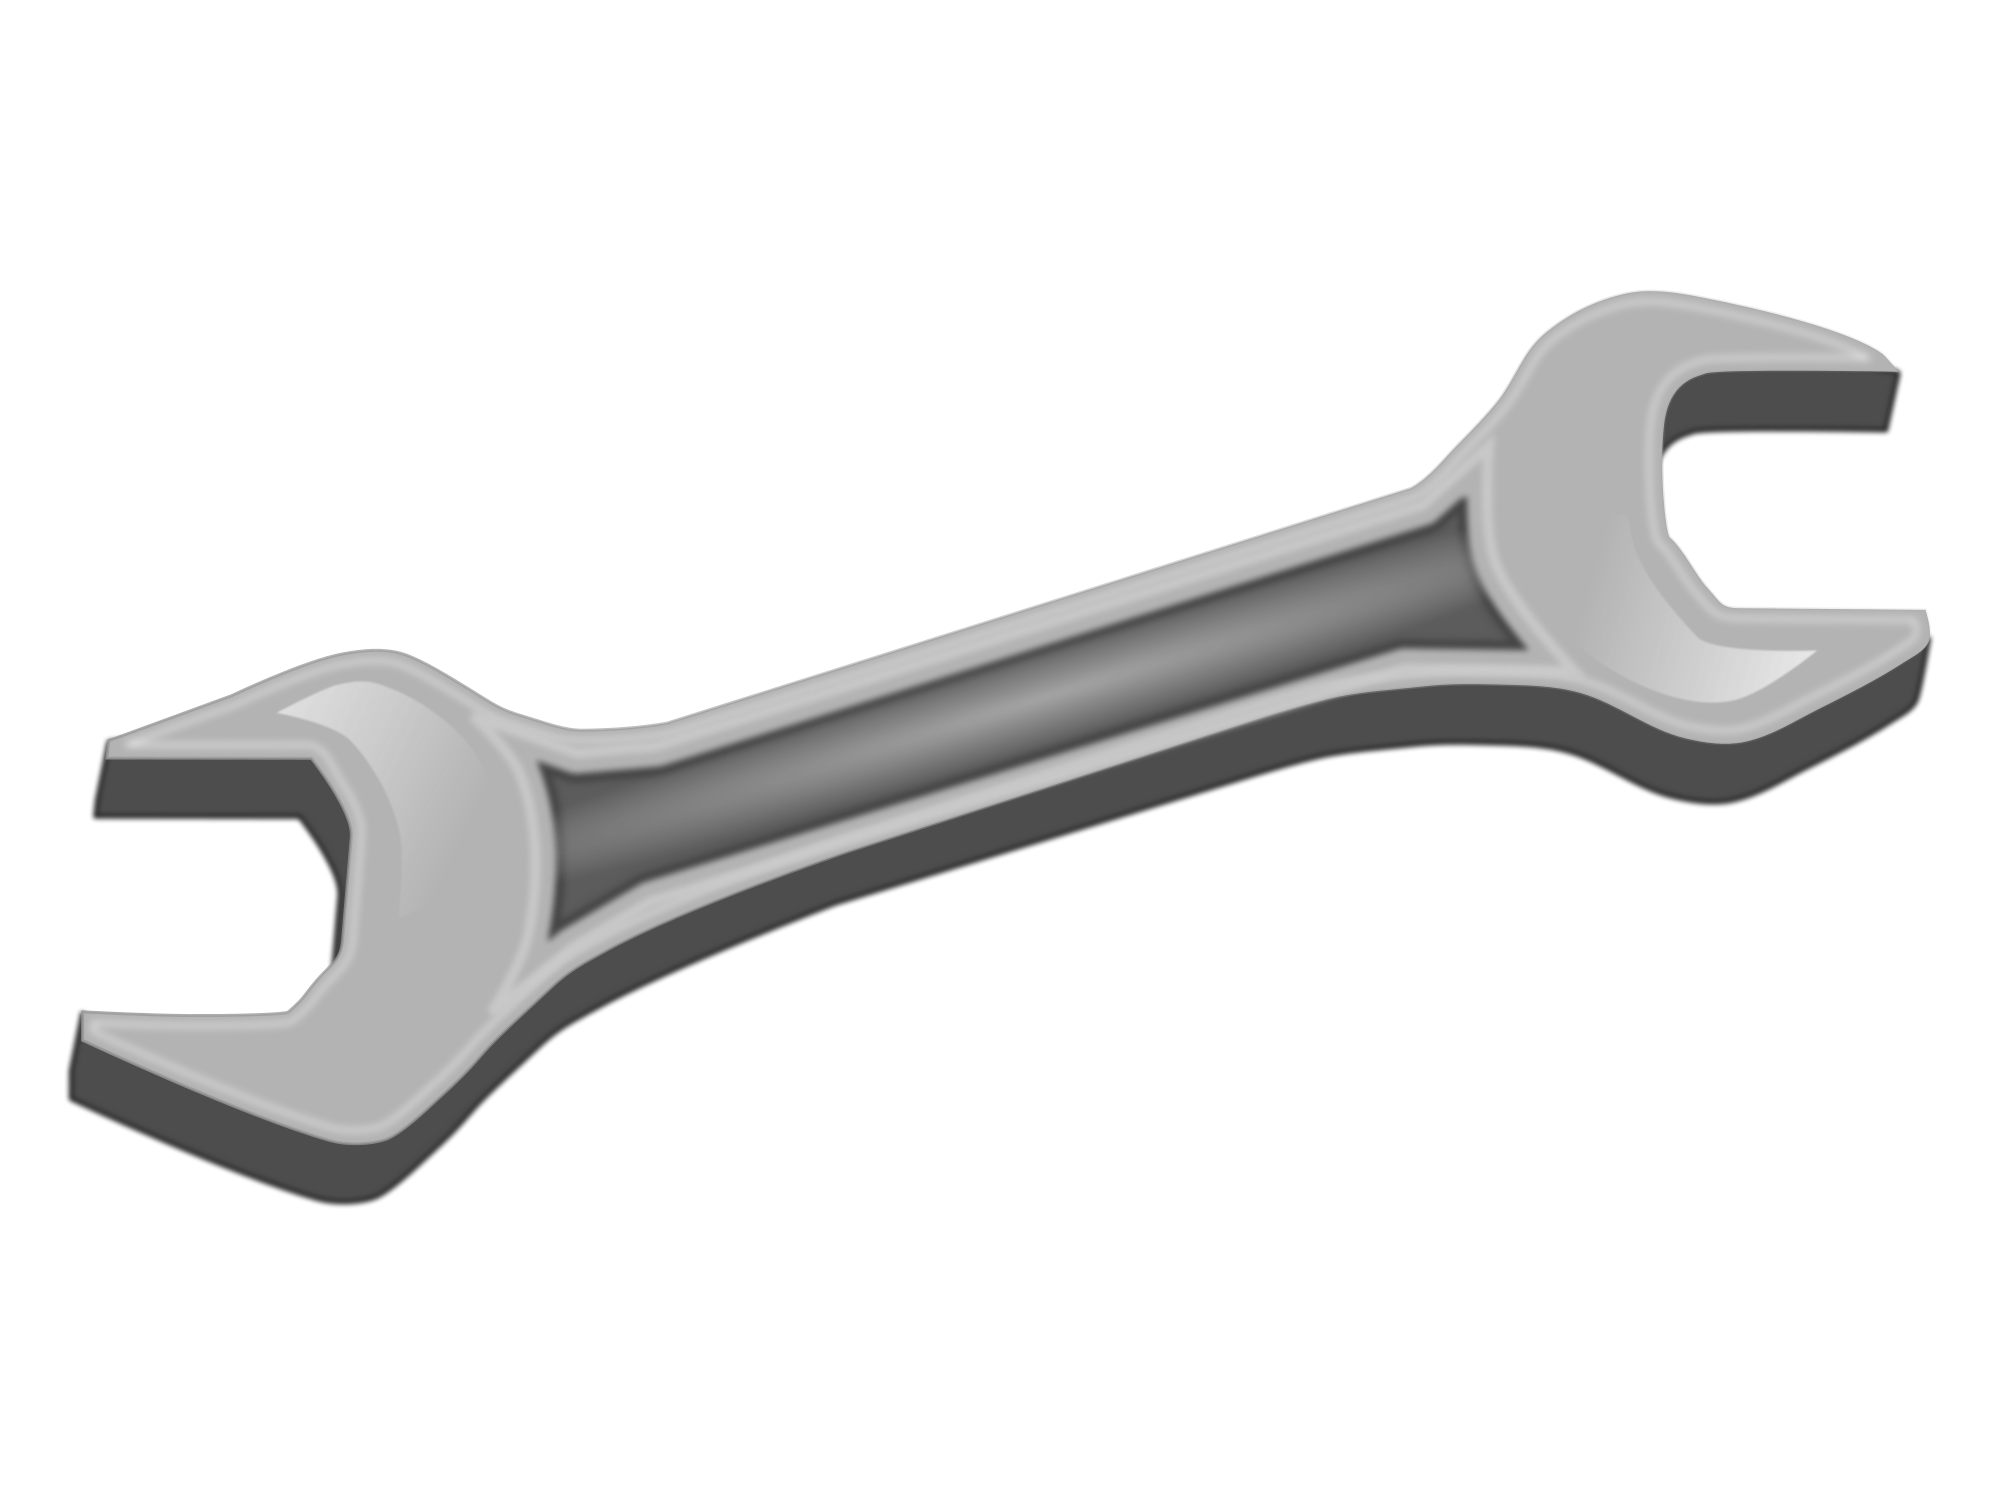 hq wrench transparent photo #39742